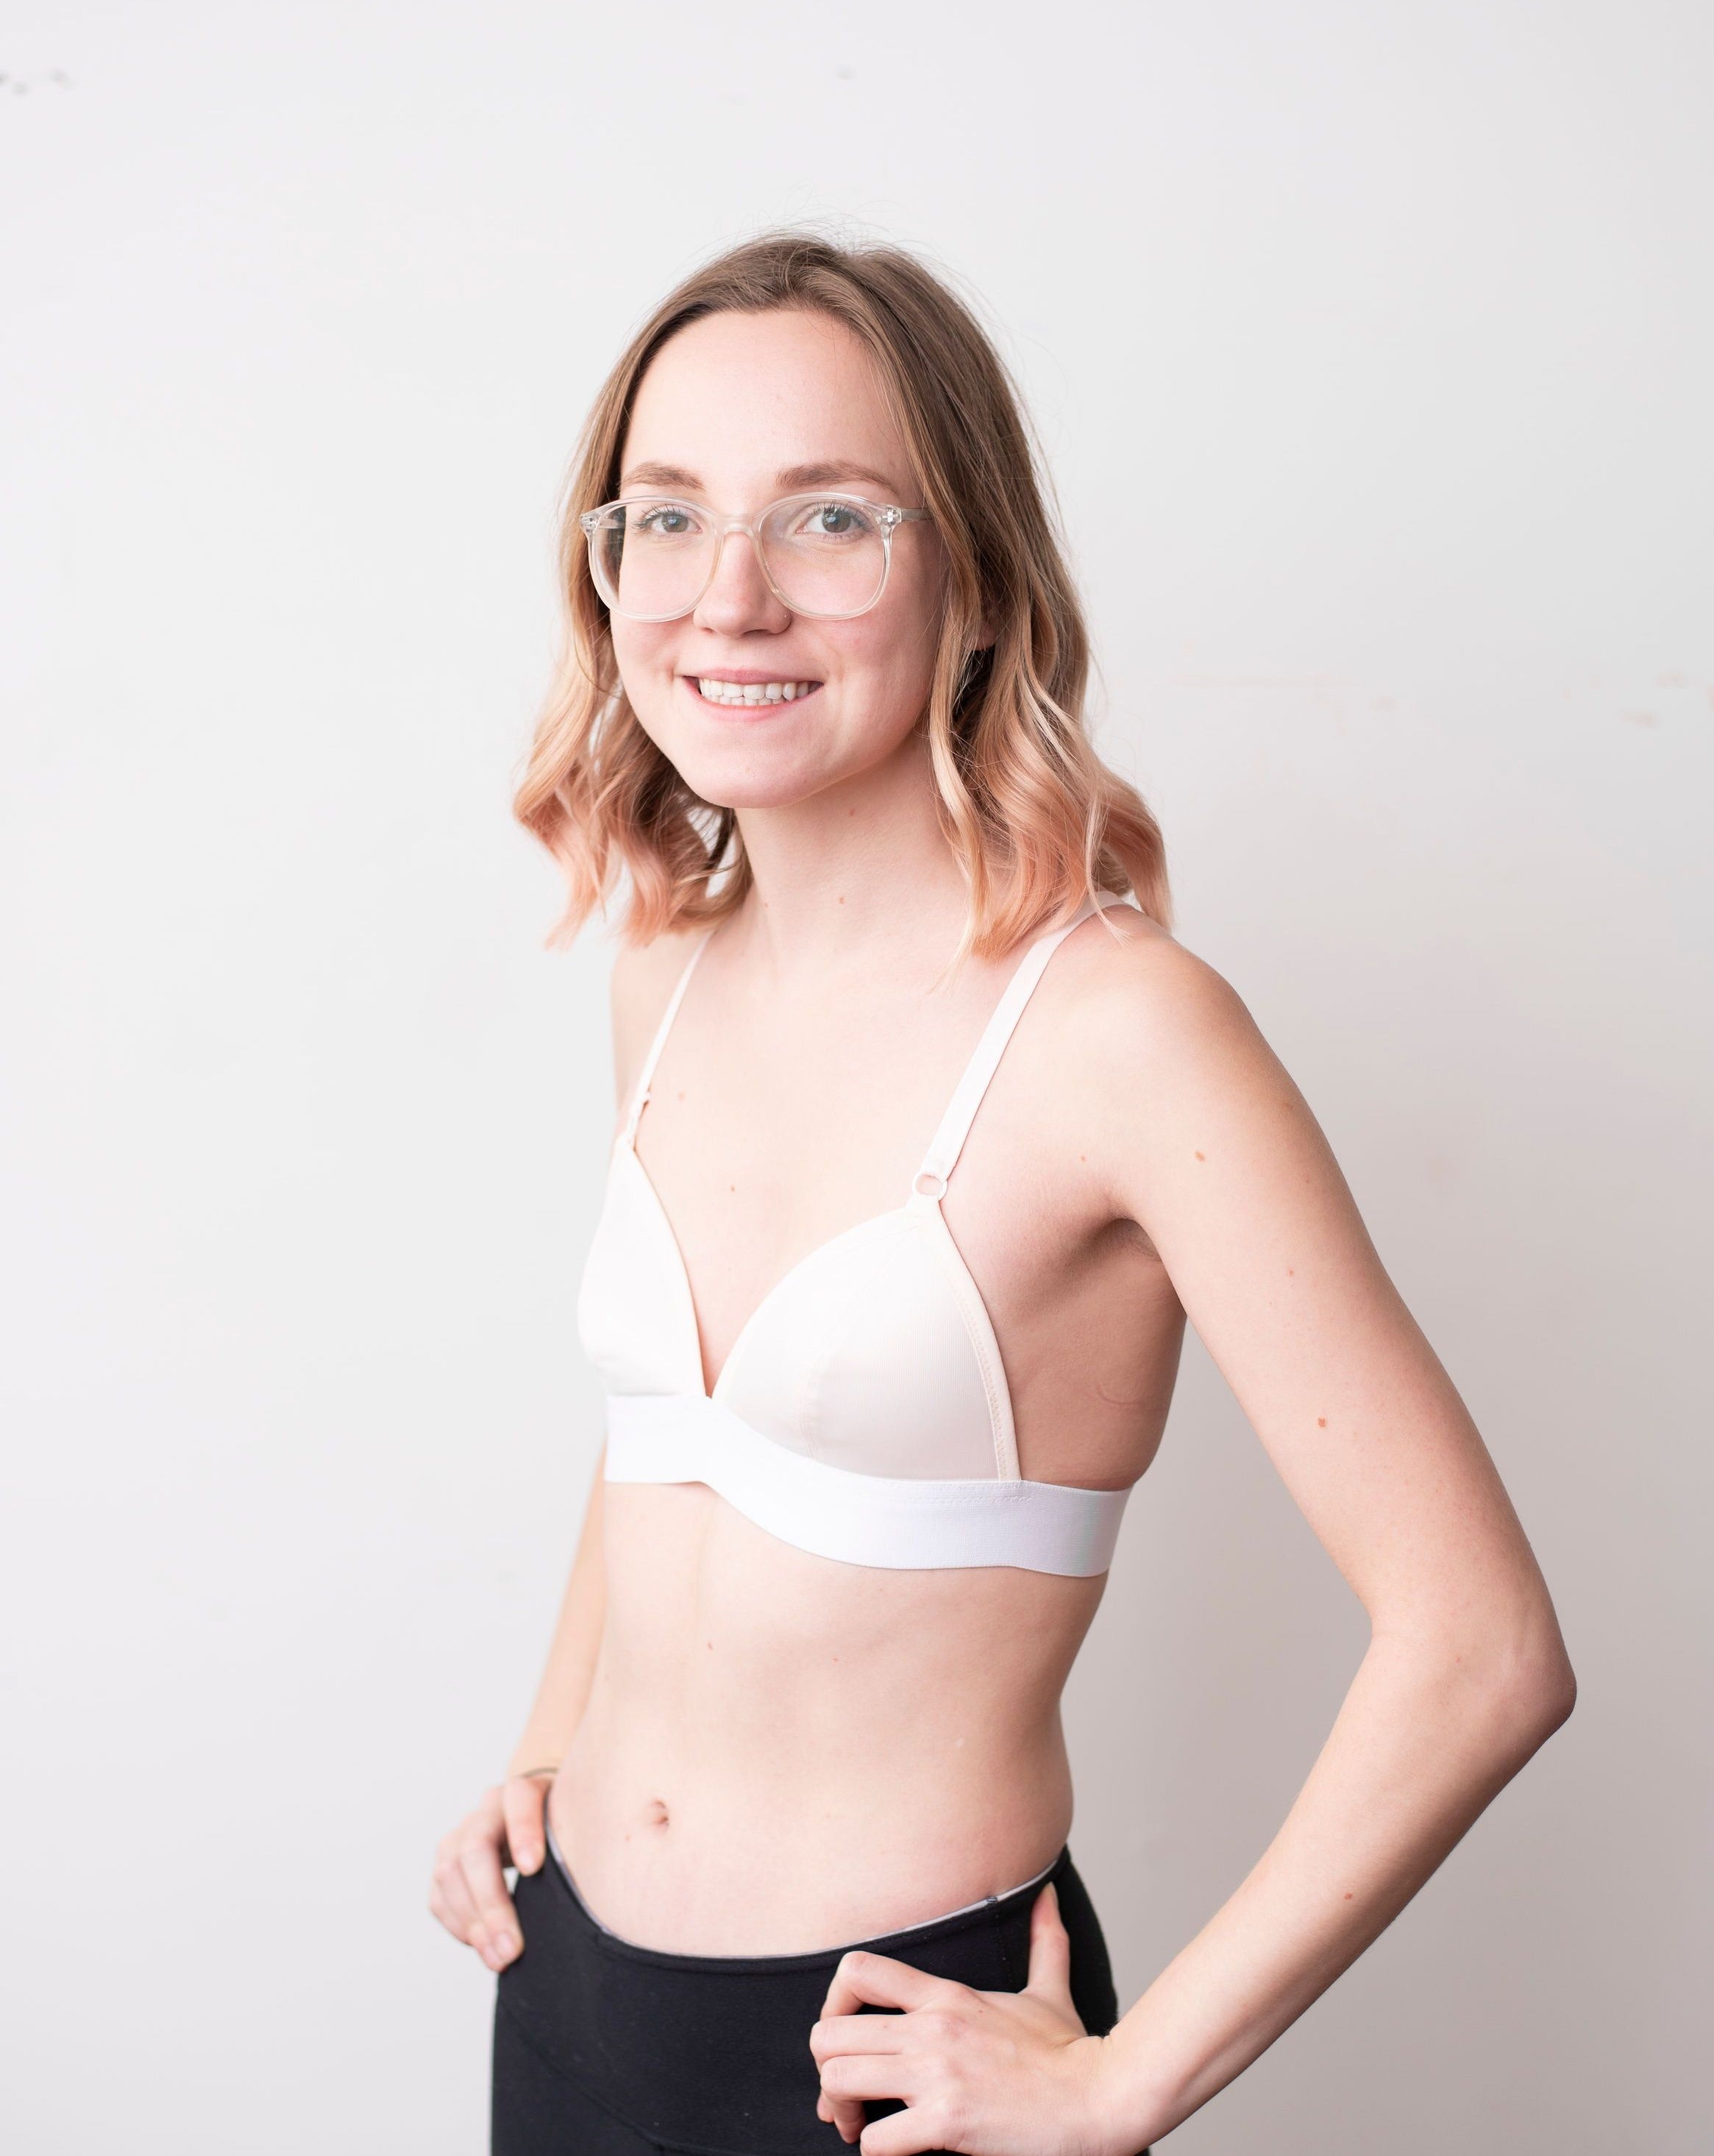 Haley from Rubies Bras, a female with medium blond hair wearing a peach and white wirefree bra from our petites collection. Side body shot on white back drop.